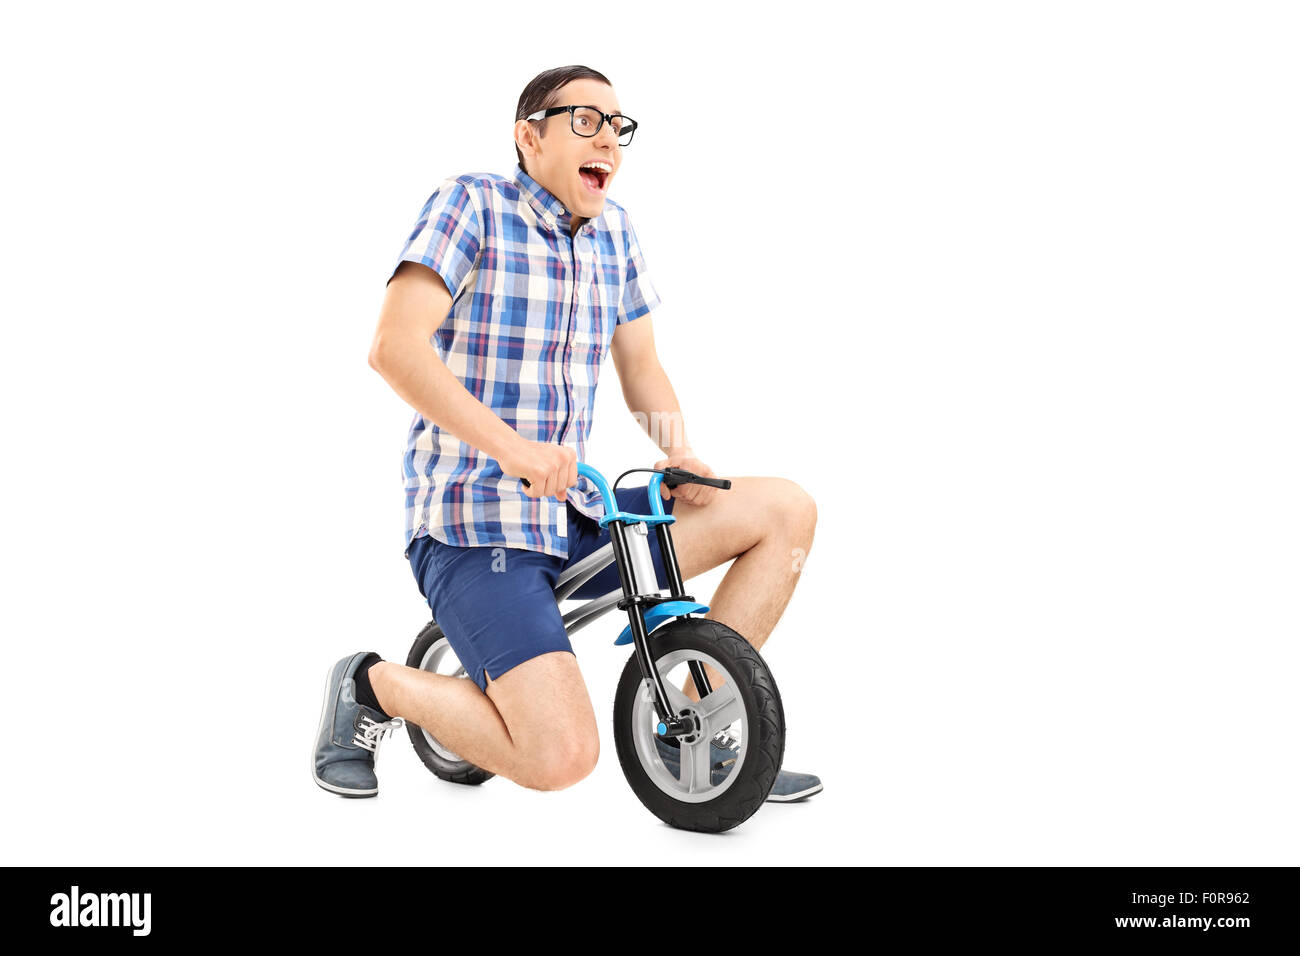 Studio shot of a silly young guy riding a tiny bicycle isolated on white background Stock Photo